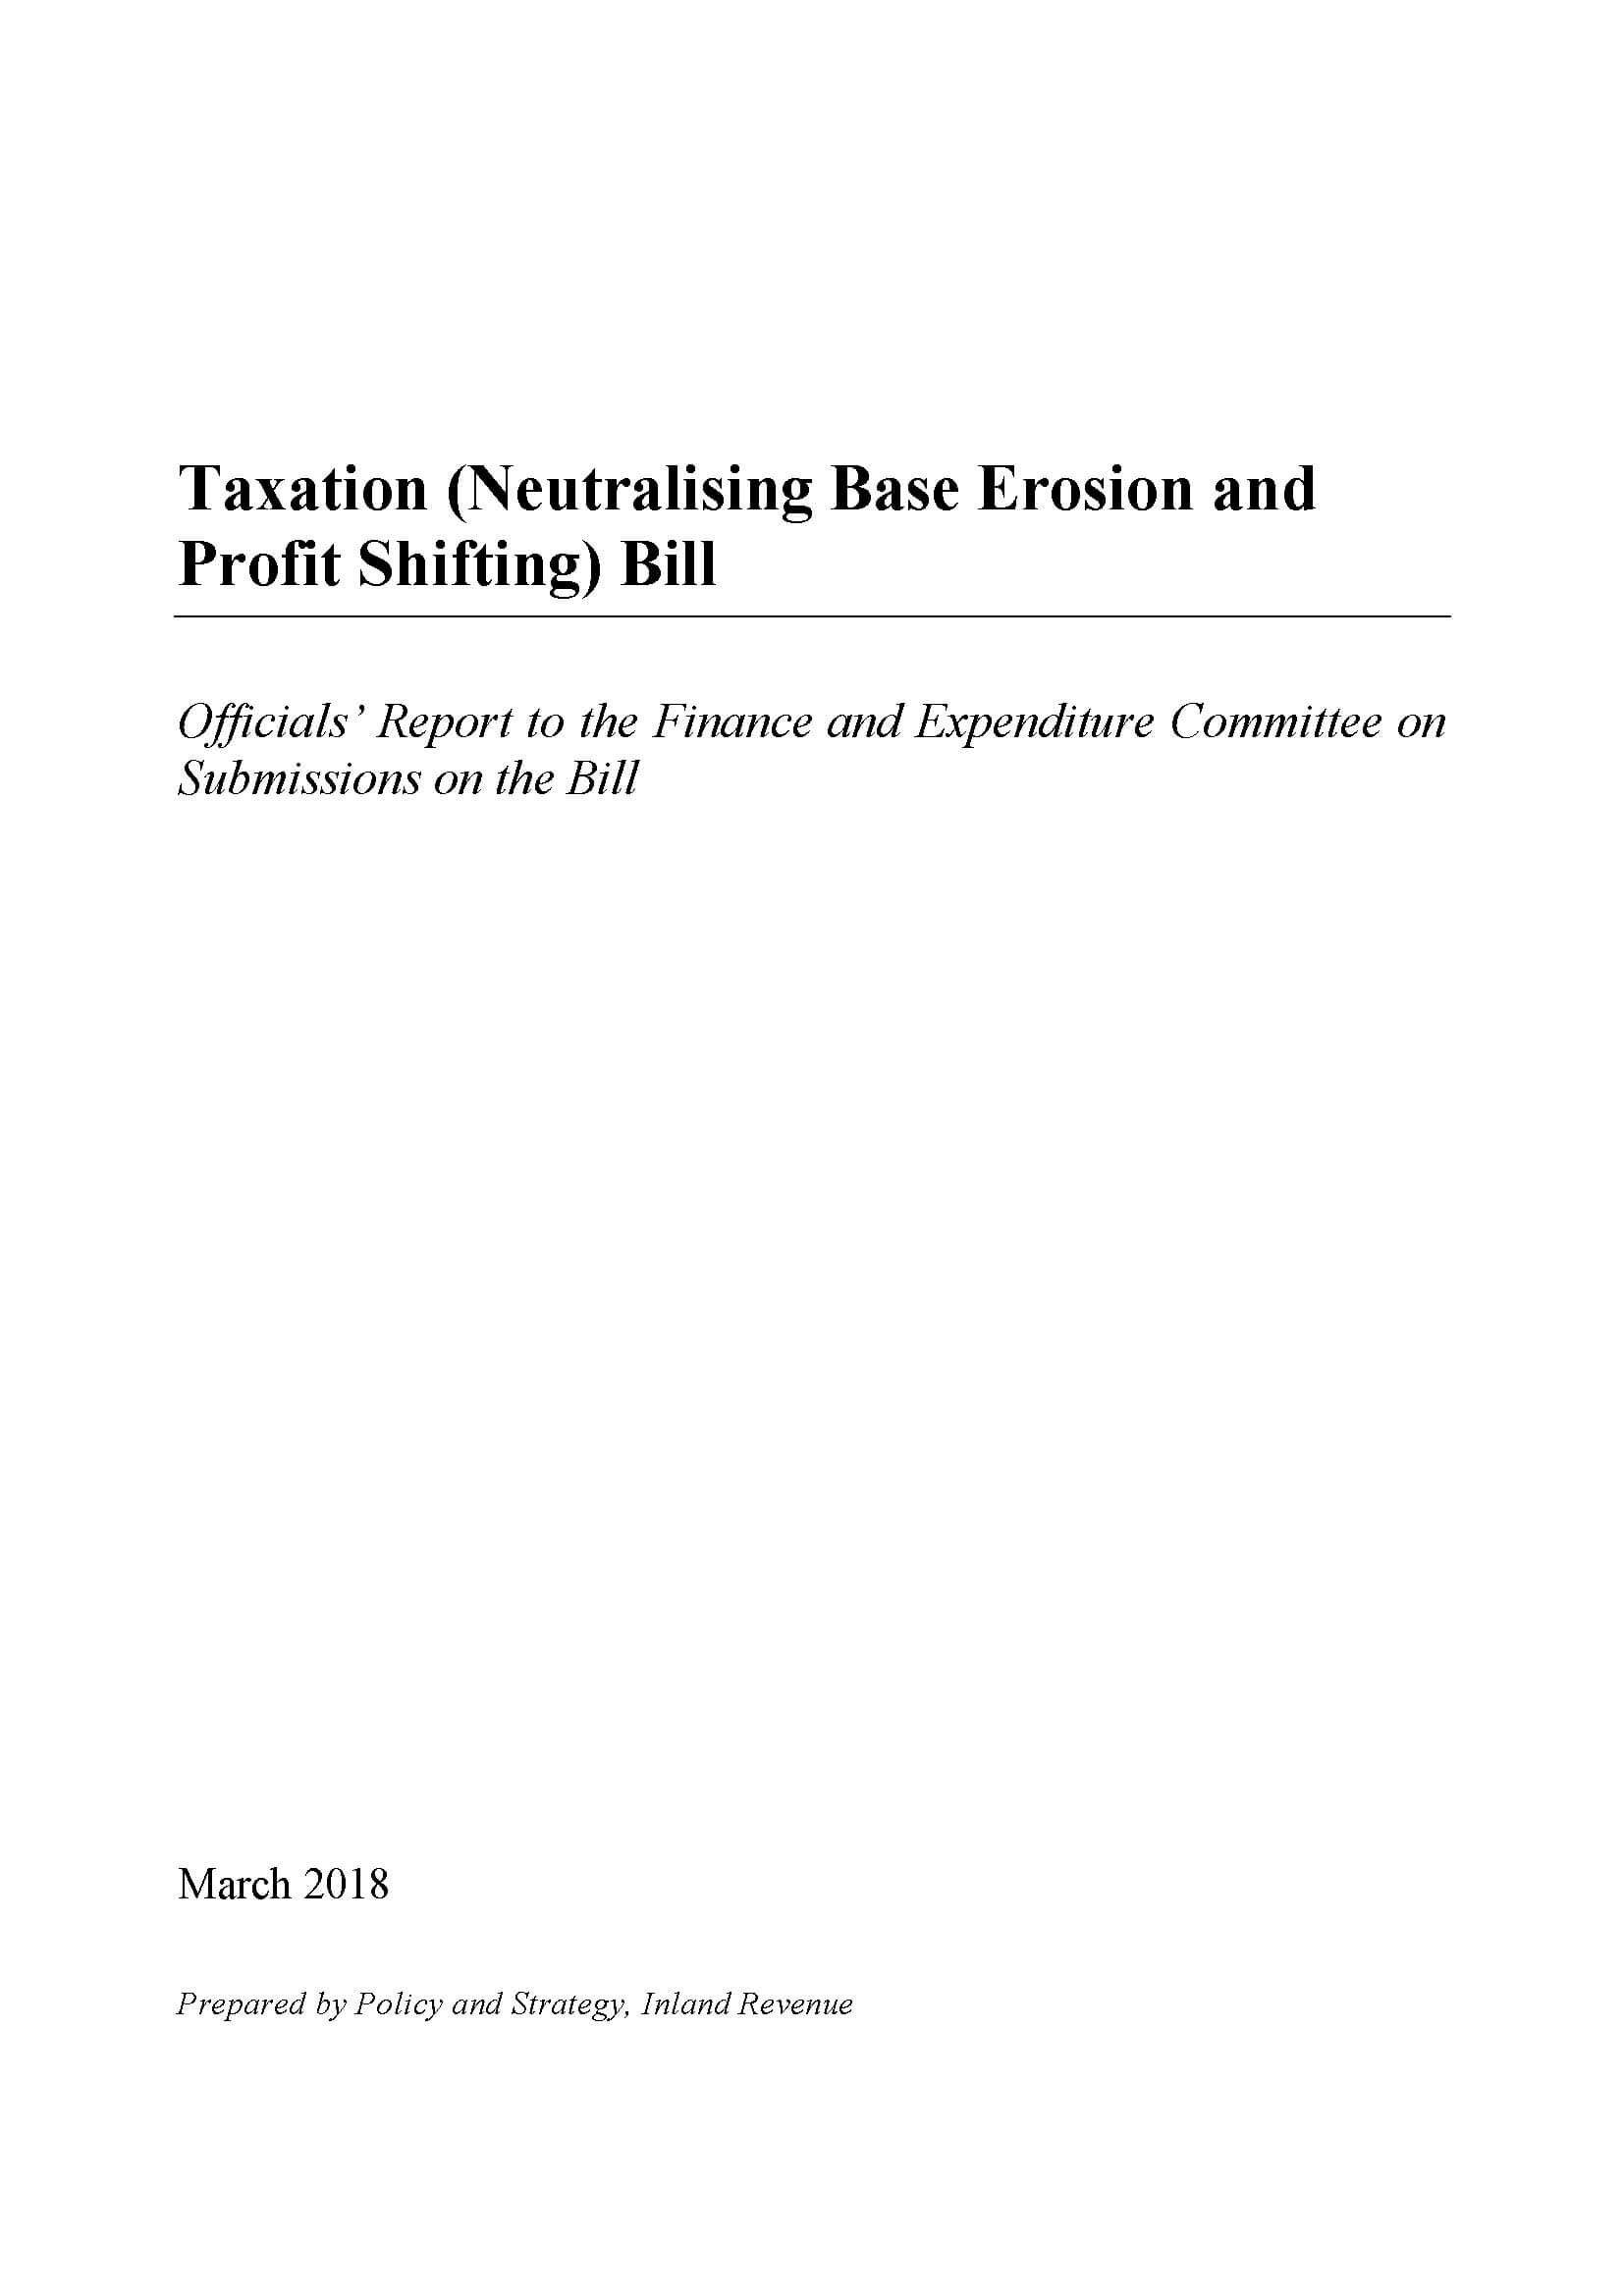 Publication cover page: Title - Taxation (Neutralising Base Erosion and Profit Shifting) Bill - Officials' report to the Finance and Expenditure Committee on submissions on the Bill; Publication date - March 2018